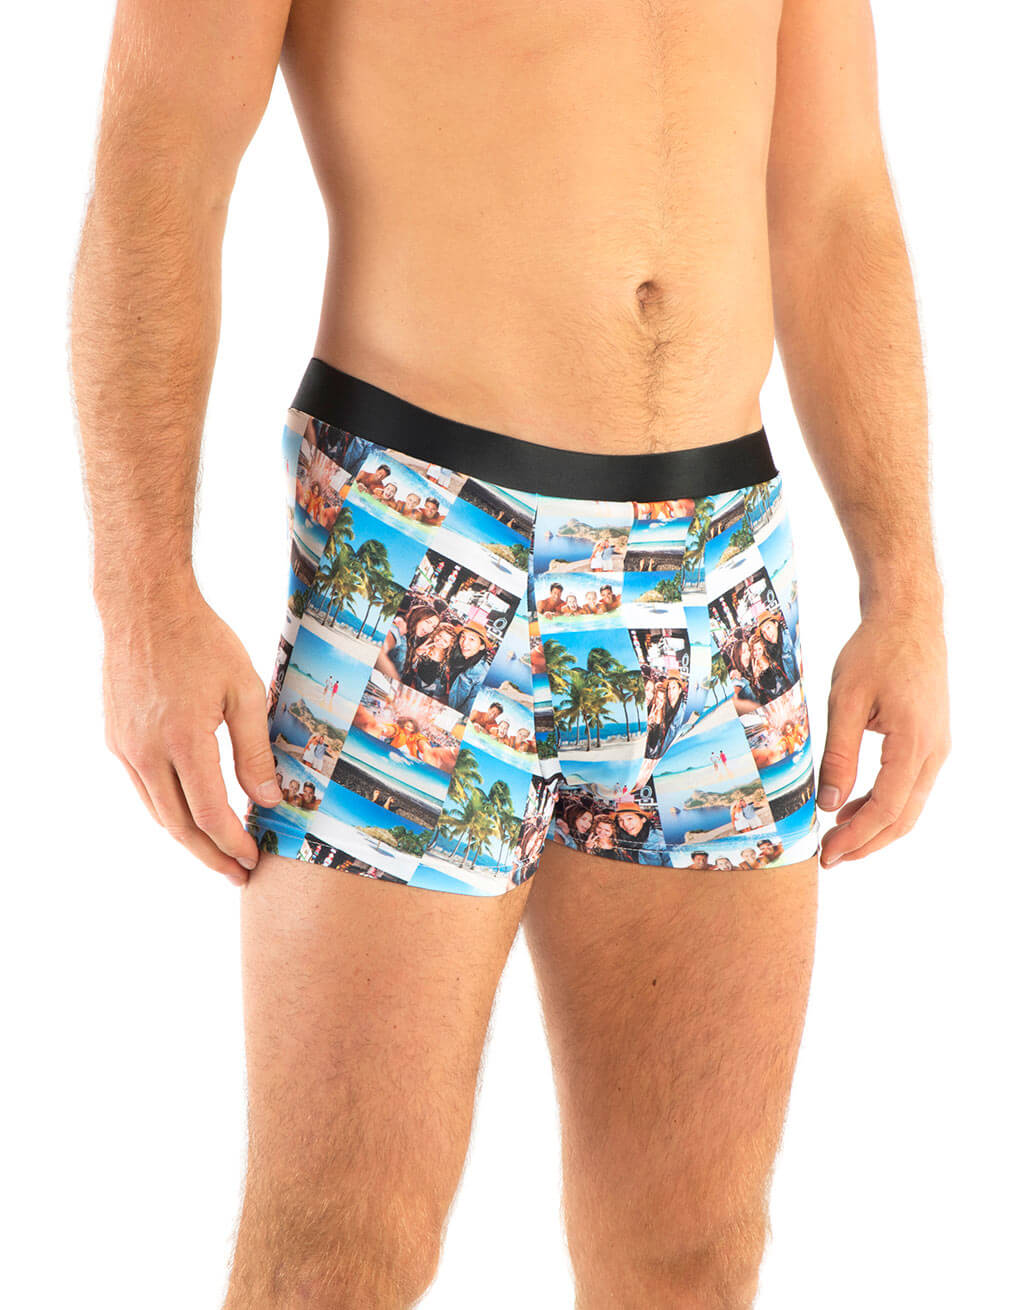 Photo Collage Custom Boxers - Personalized Boxers – Super Socks